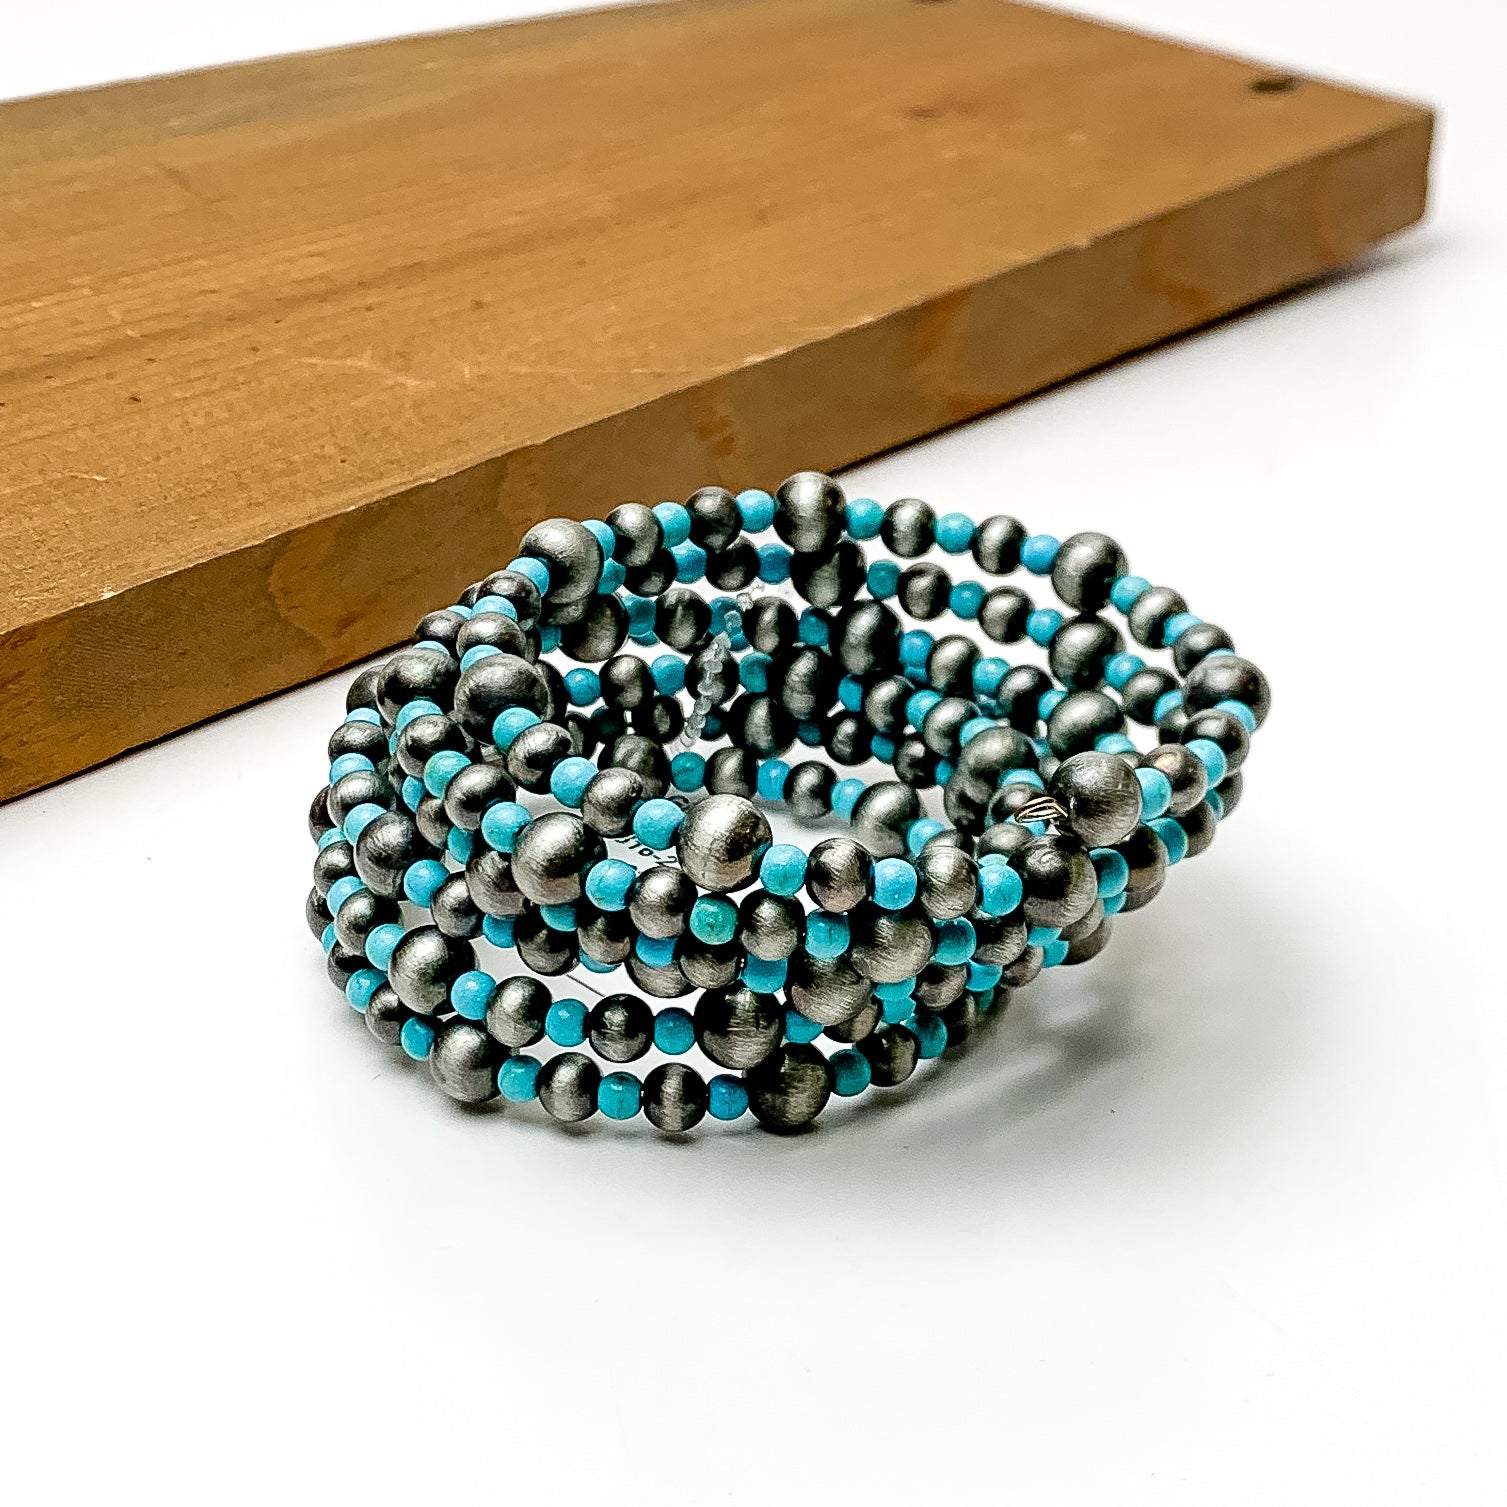 Wrap Around Beaded Bracelet in Silver Tone and Turquoise Blue - Giddy Up Glamour Boutique